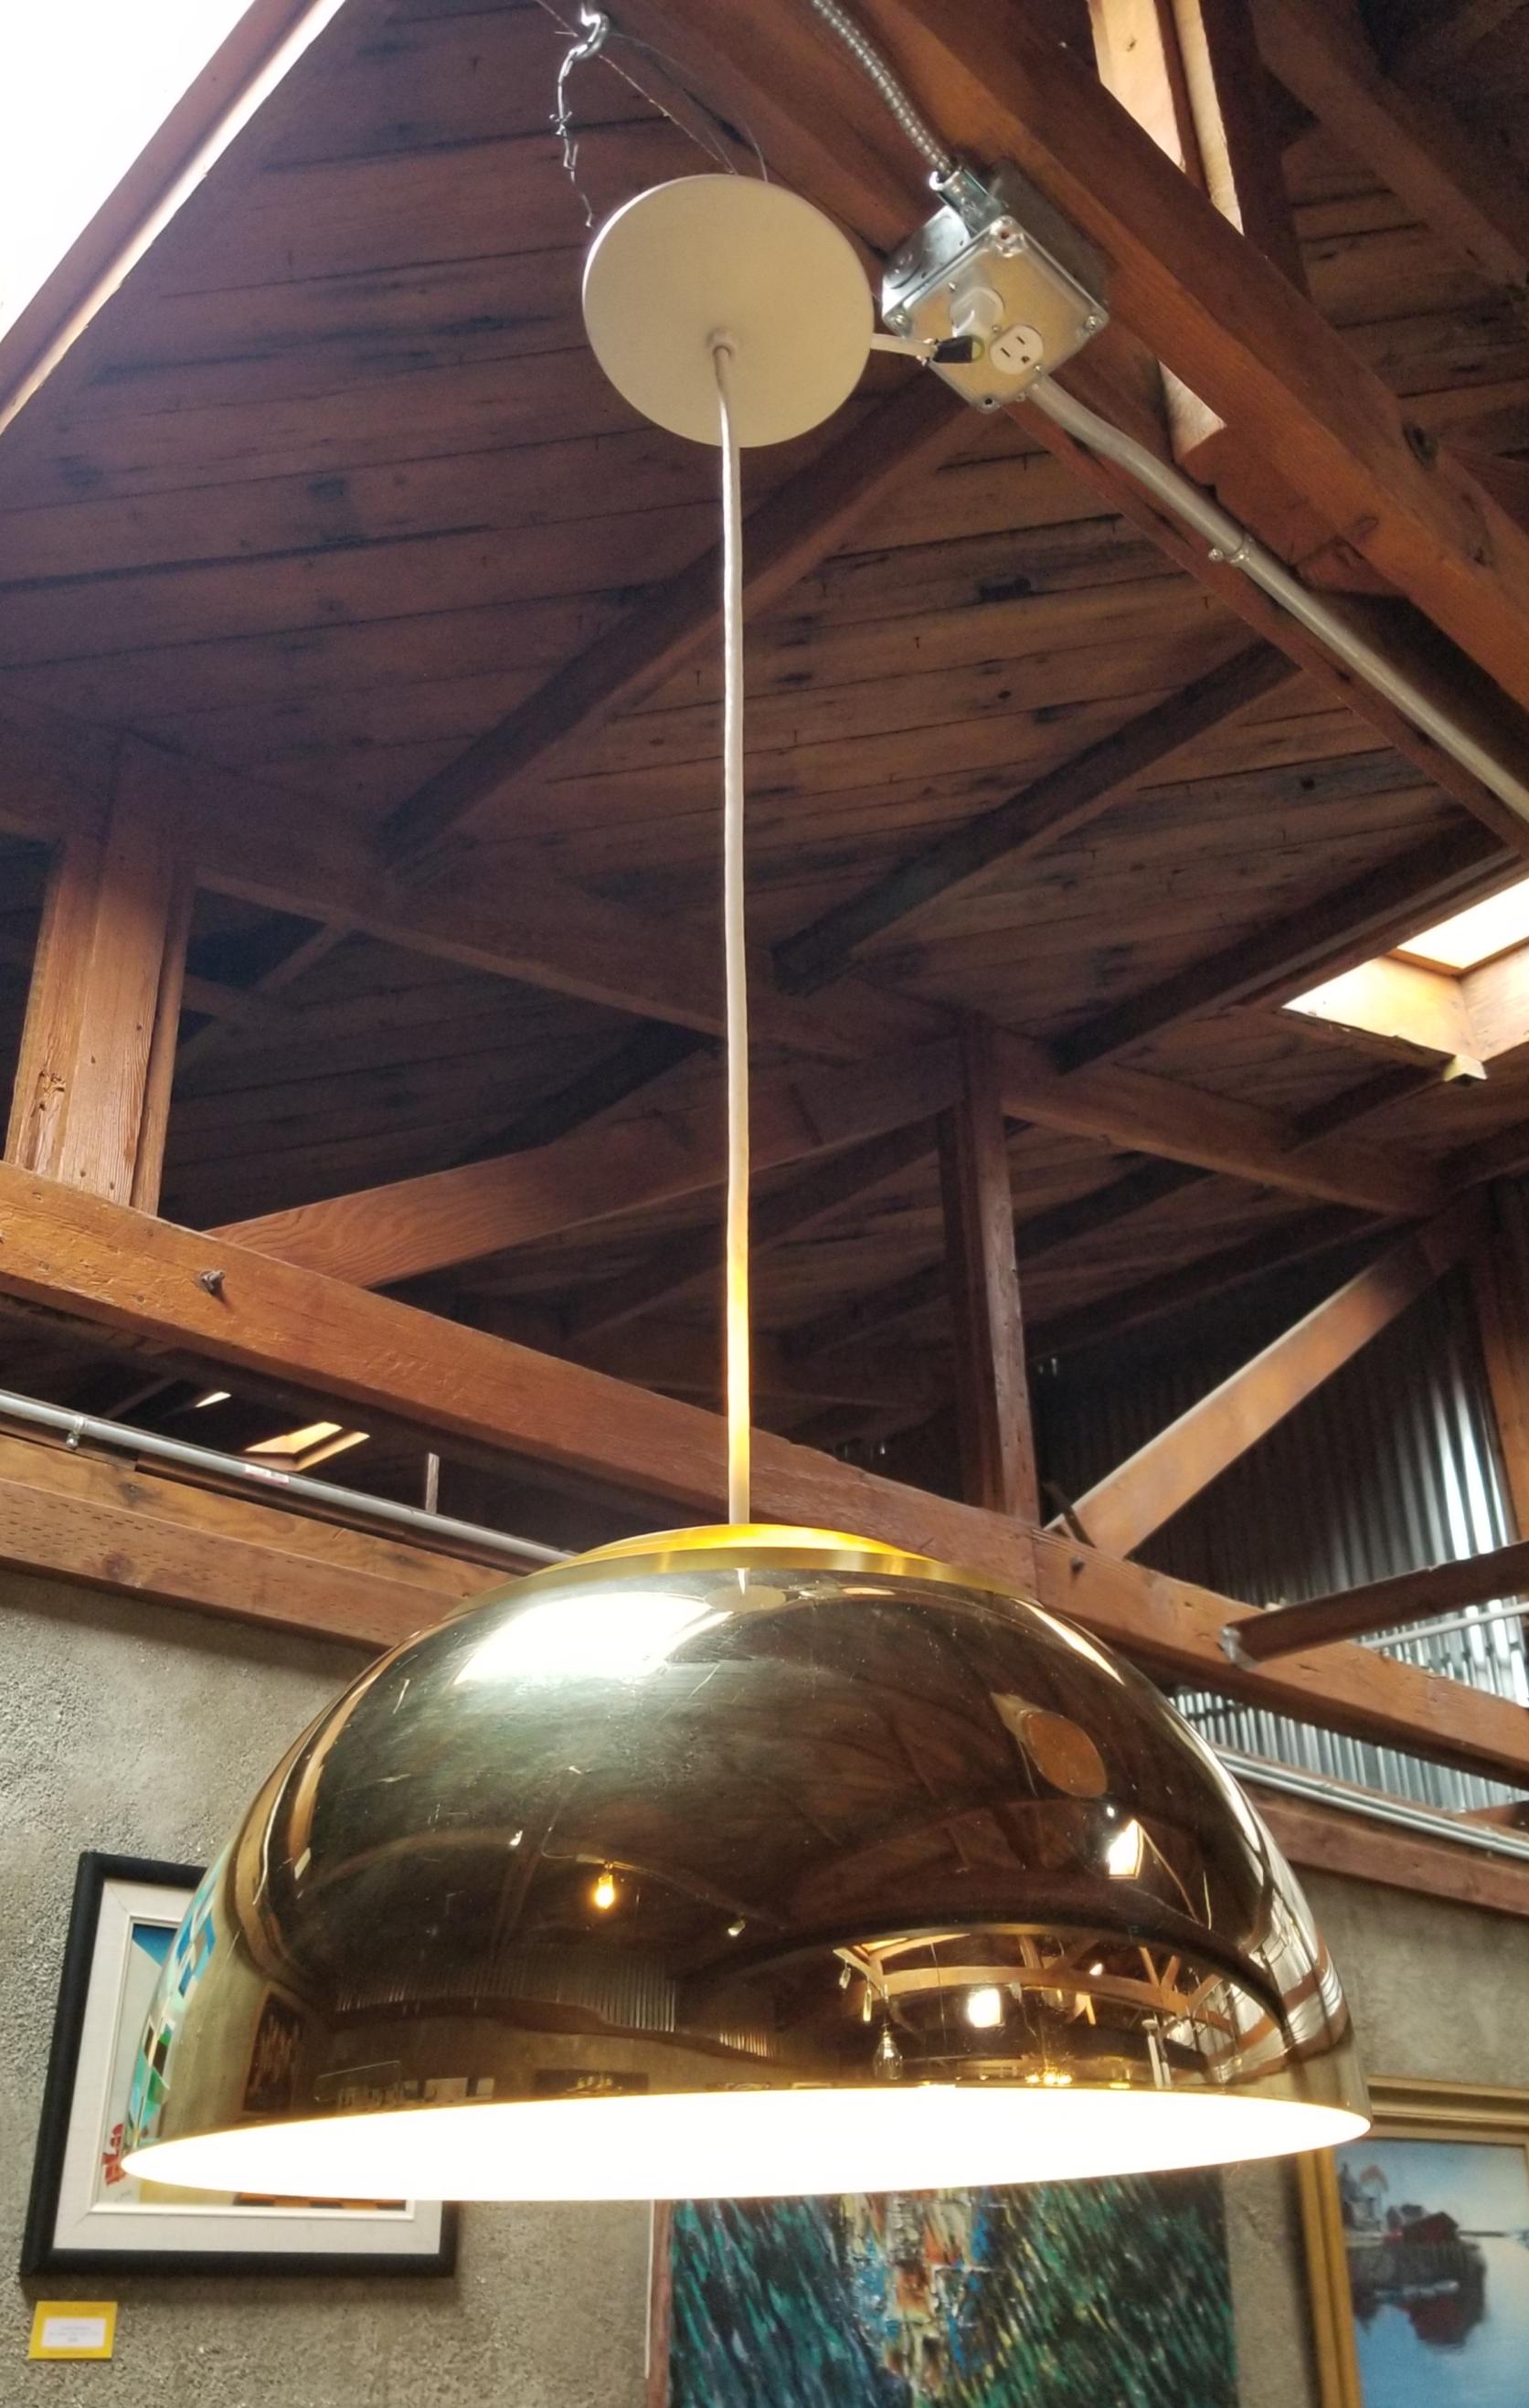 A polished brass pendant chandelier by Lightolier. Designed with 5 concentric, brushed brass louvers over a polished brass metal domed shade. Concentric bands allow filtered upward light. Retains Lightolier paper label. Can use with a 150 watt